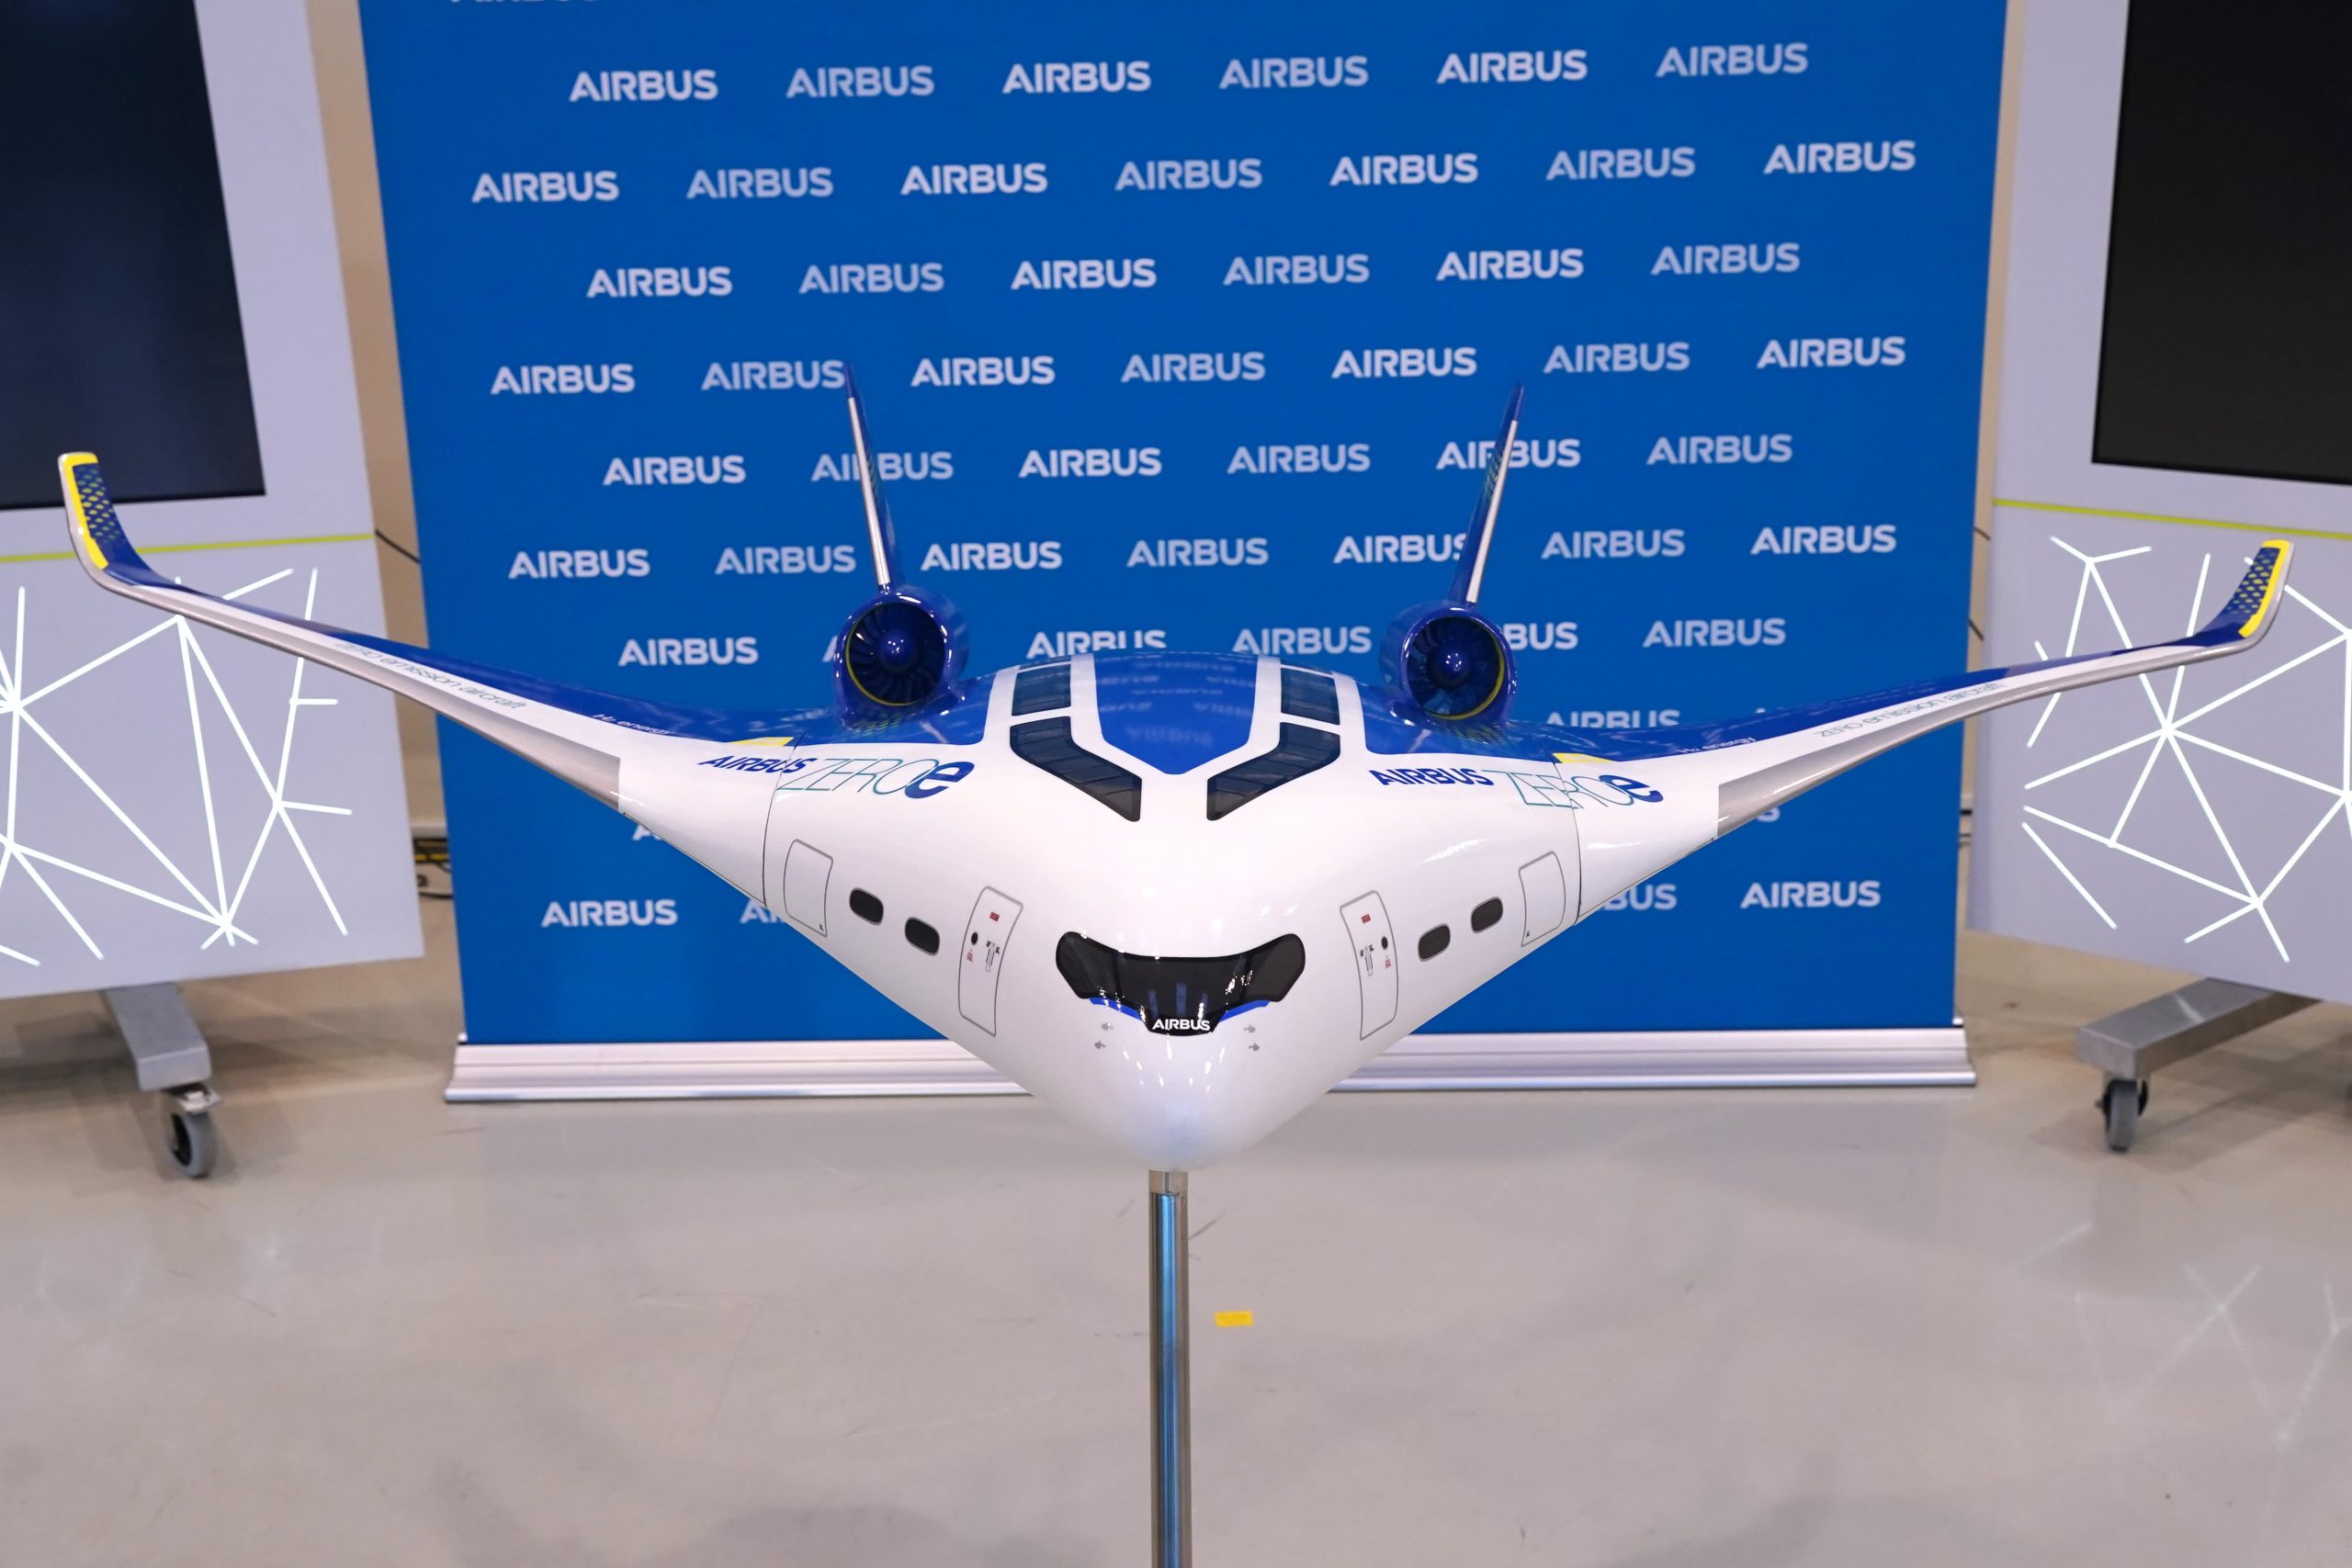 Airbus CEO says hydrogen plane is ‘the ultimate solution’